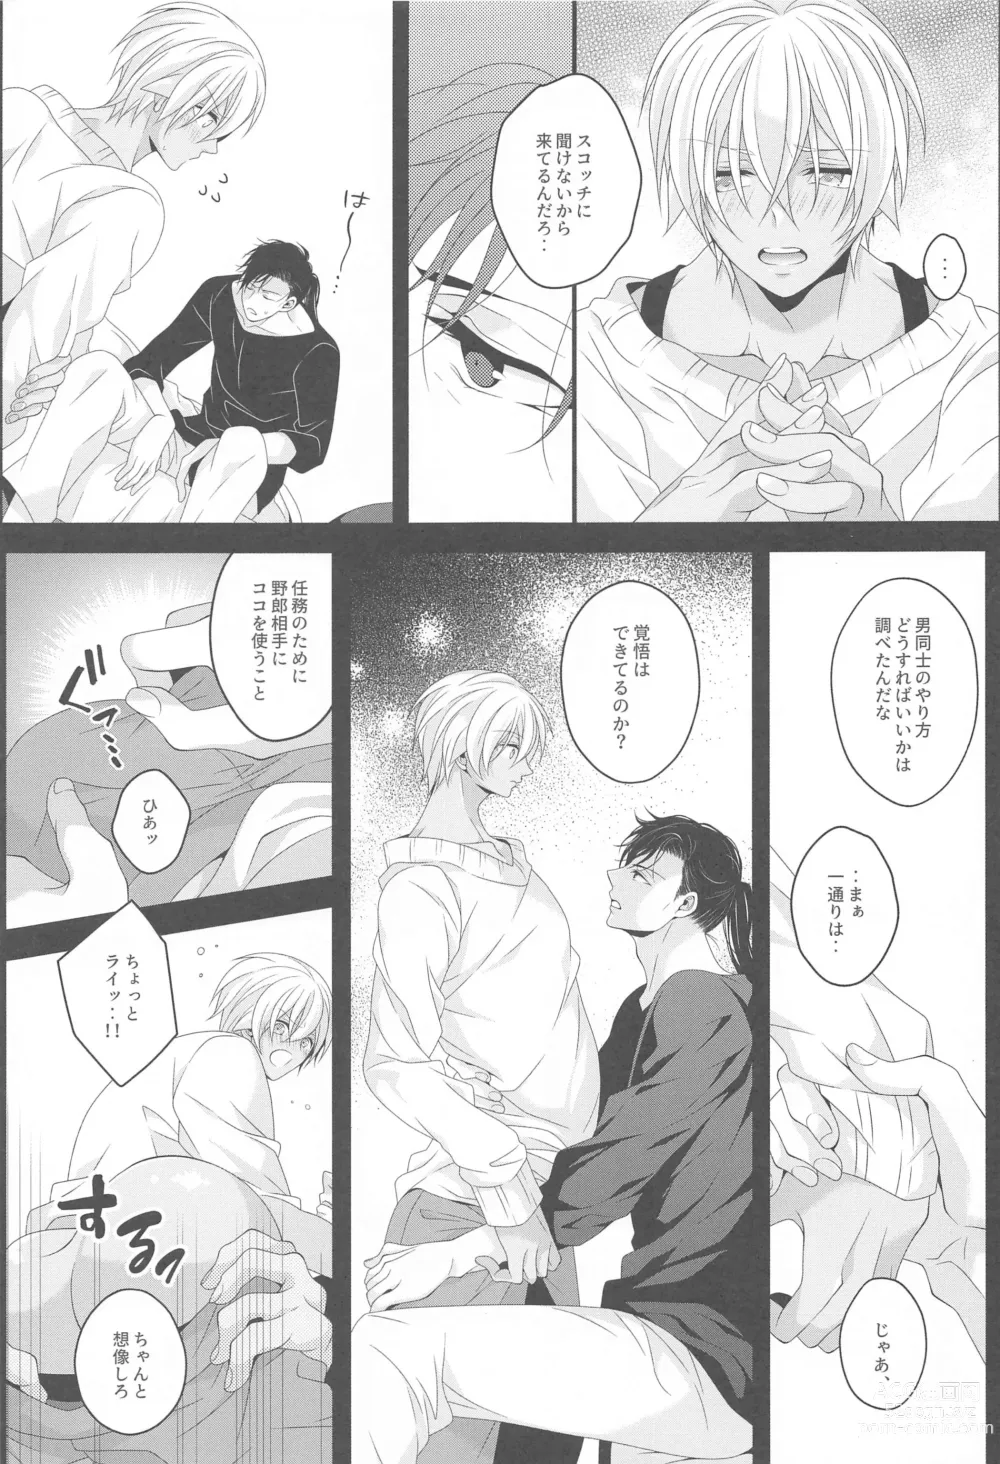 Page 12 of doujinshi Aibetsuriku no Yosame - A rainy night the pain of separation from loved ones